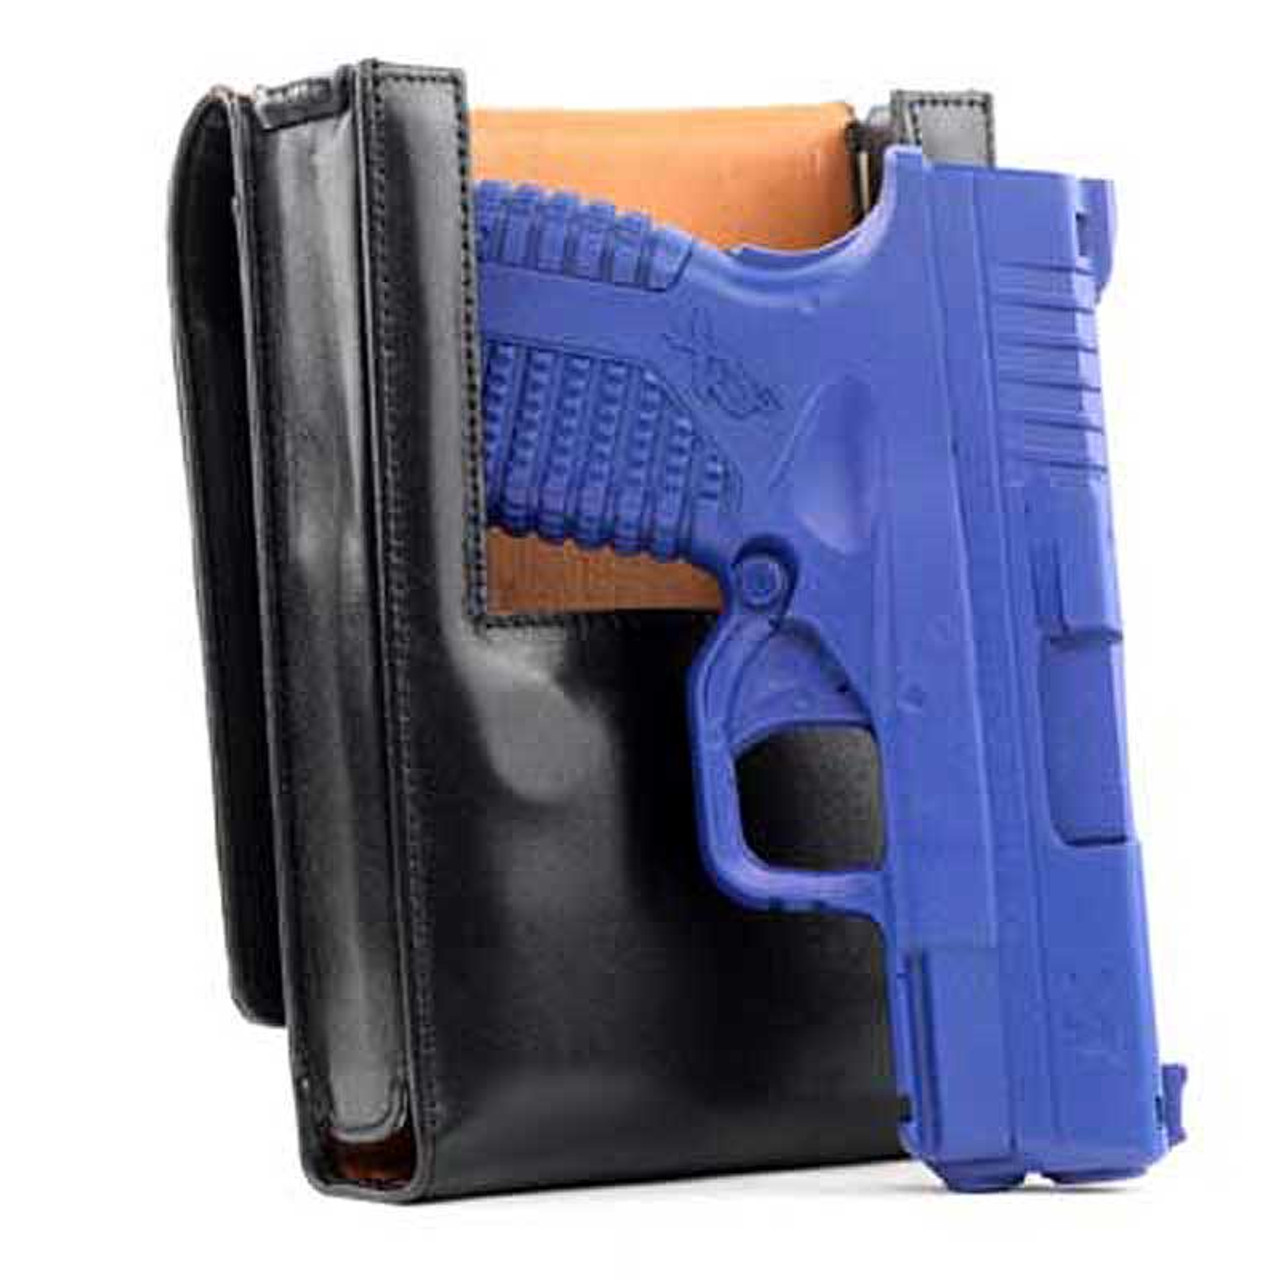 holster for xds 9mm